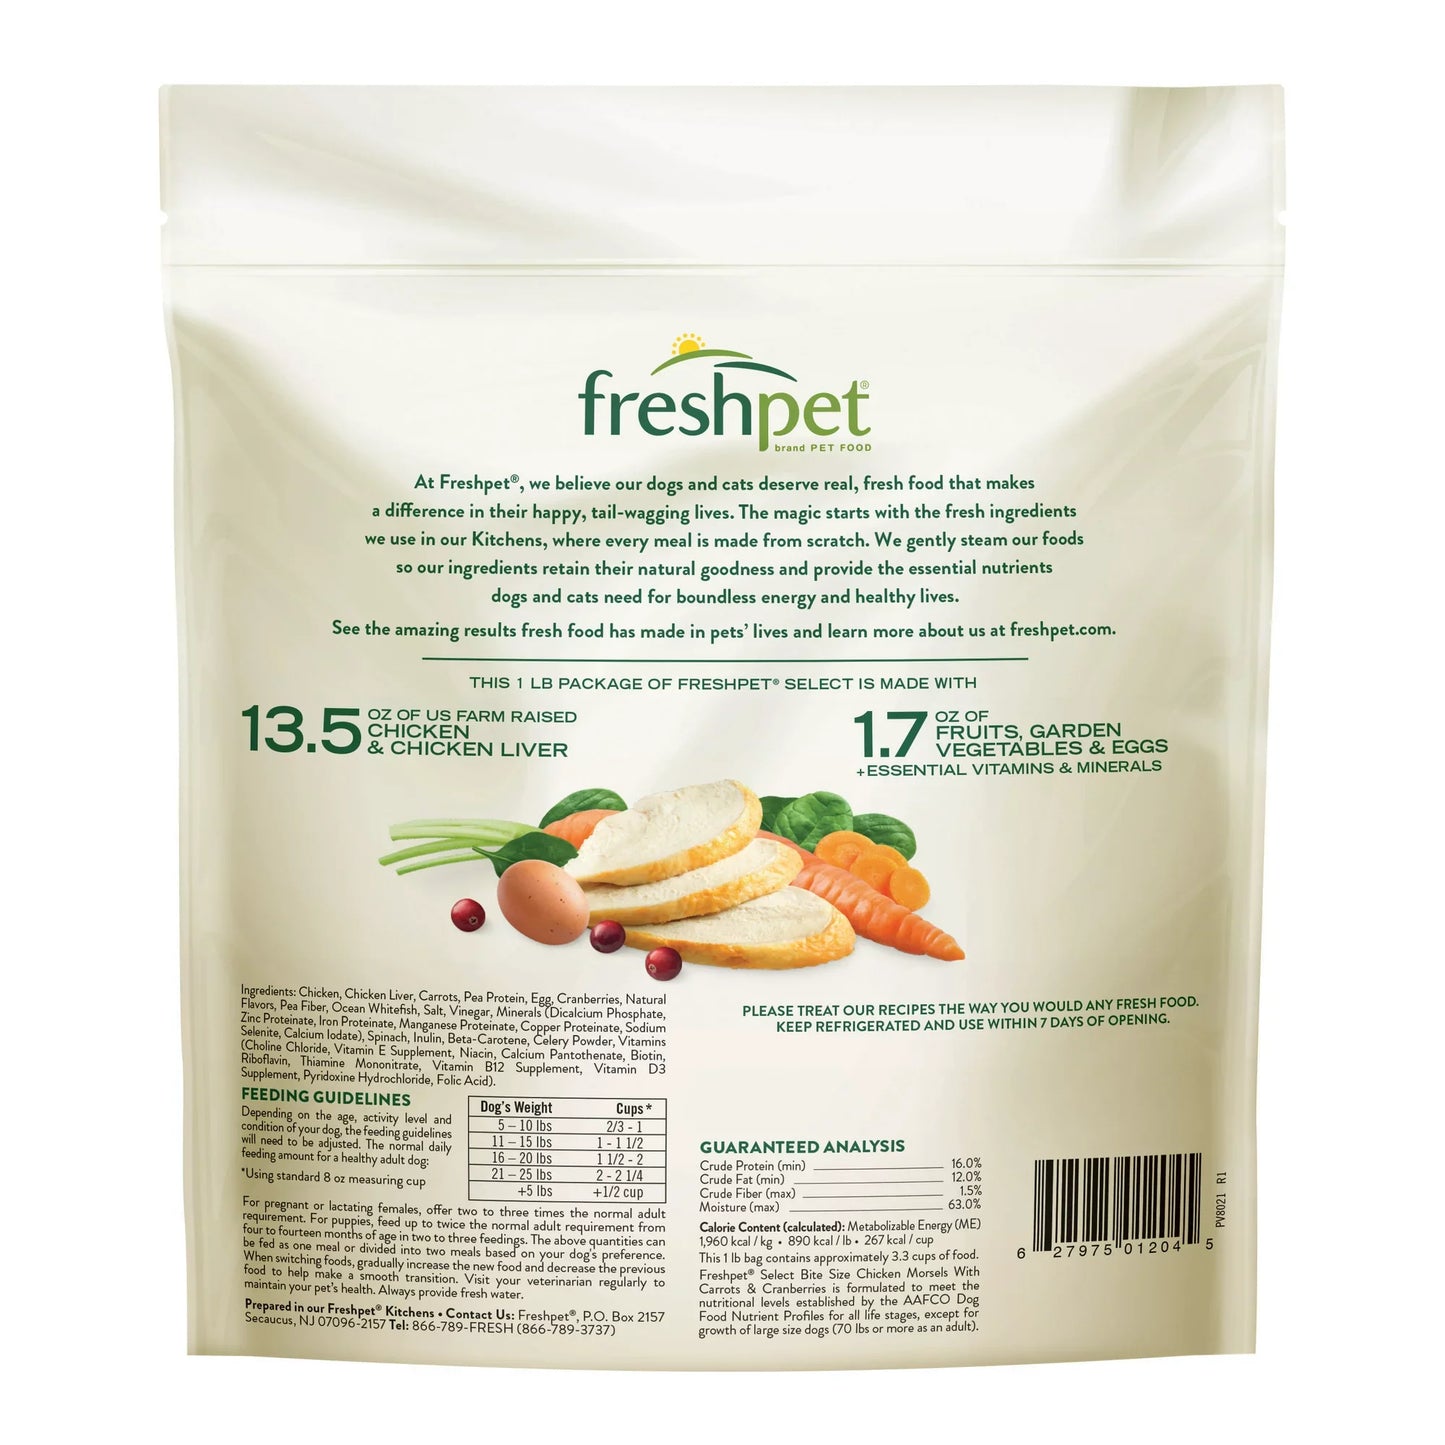 Freshpet Healthy & Natural Food for Small Dogs/Breeds, Grain Free Chicken Recipe, 1lb